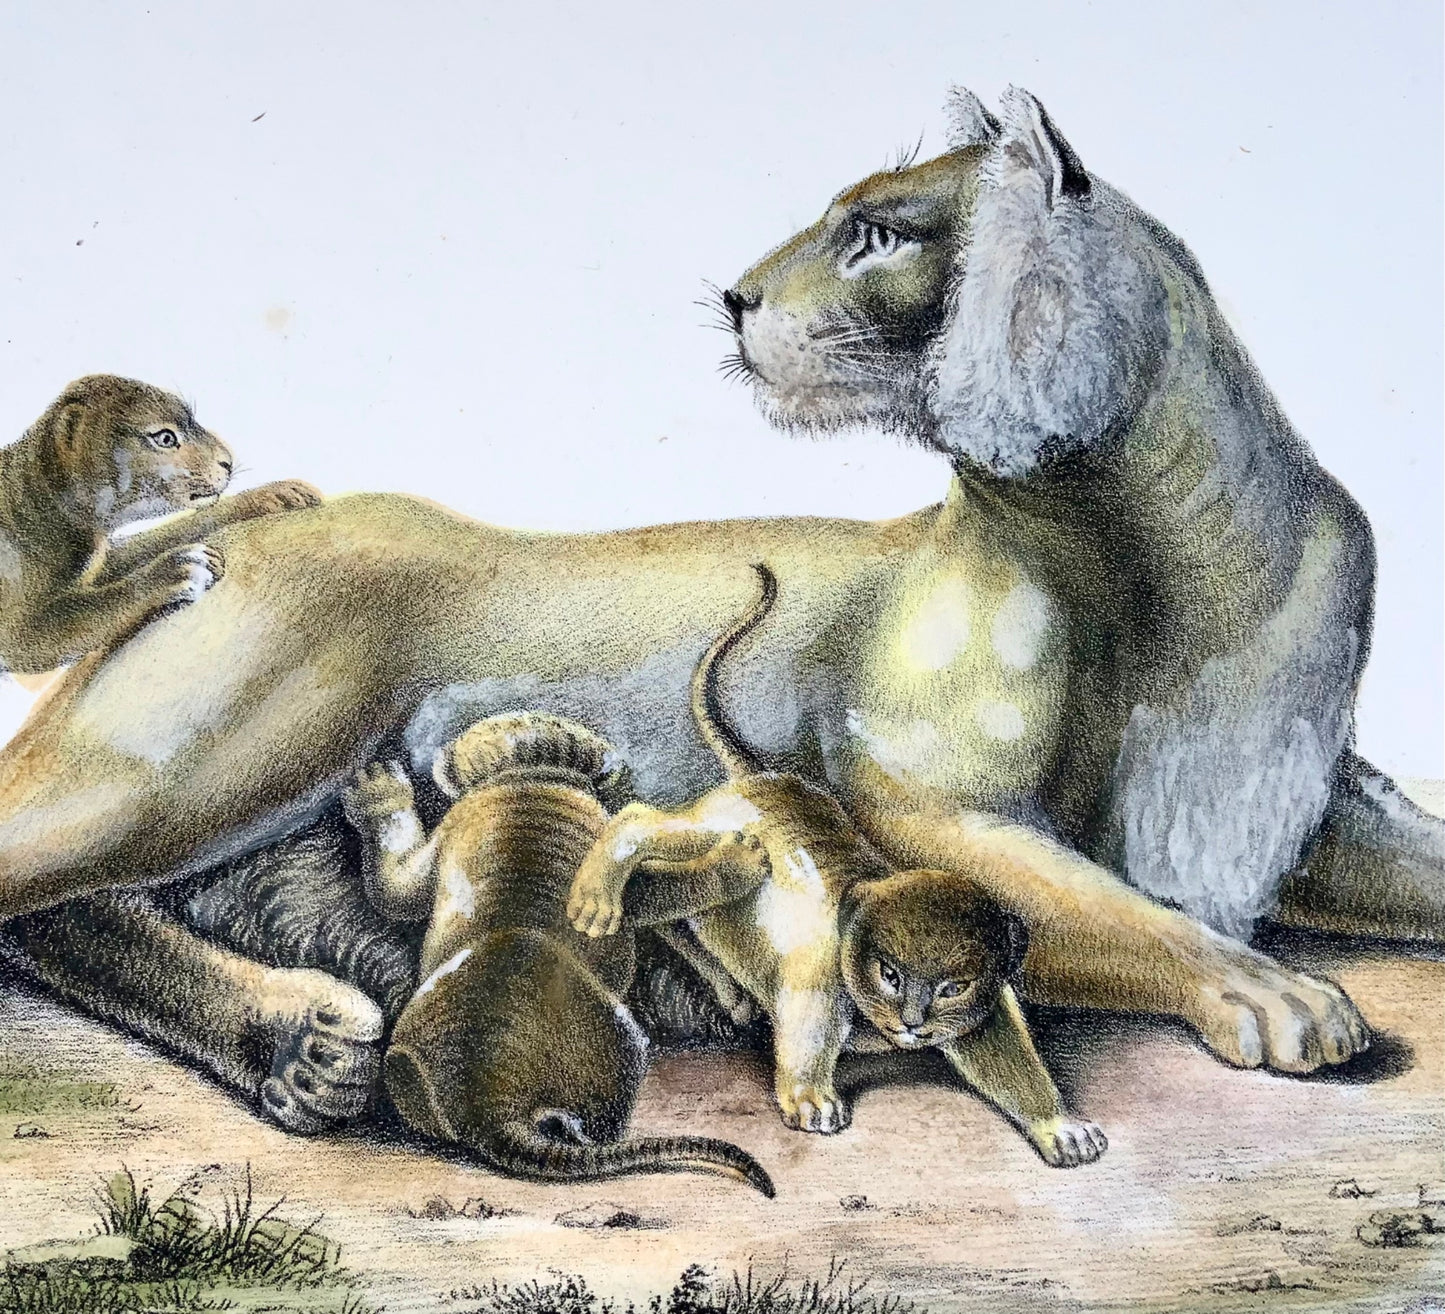 1824 Lioness with Cubs - K.J. Brodtmann hand colored FOLIO lithograph - Mammals